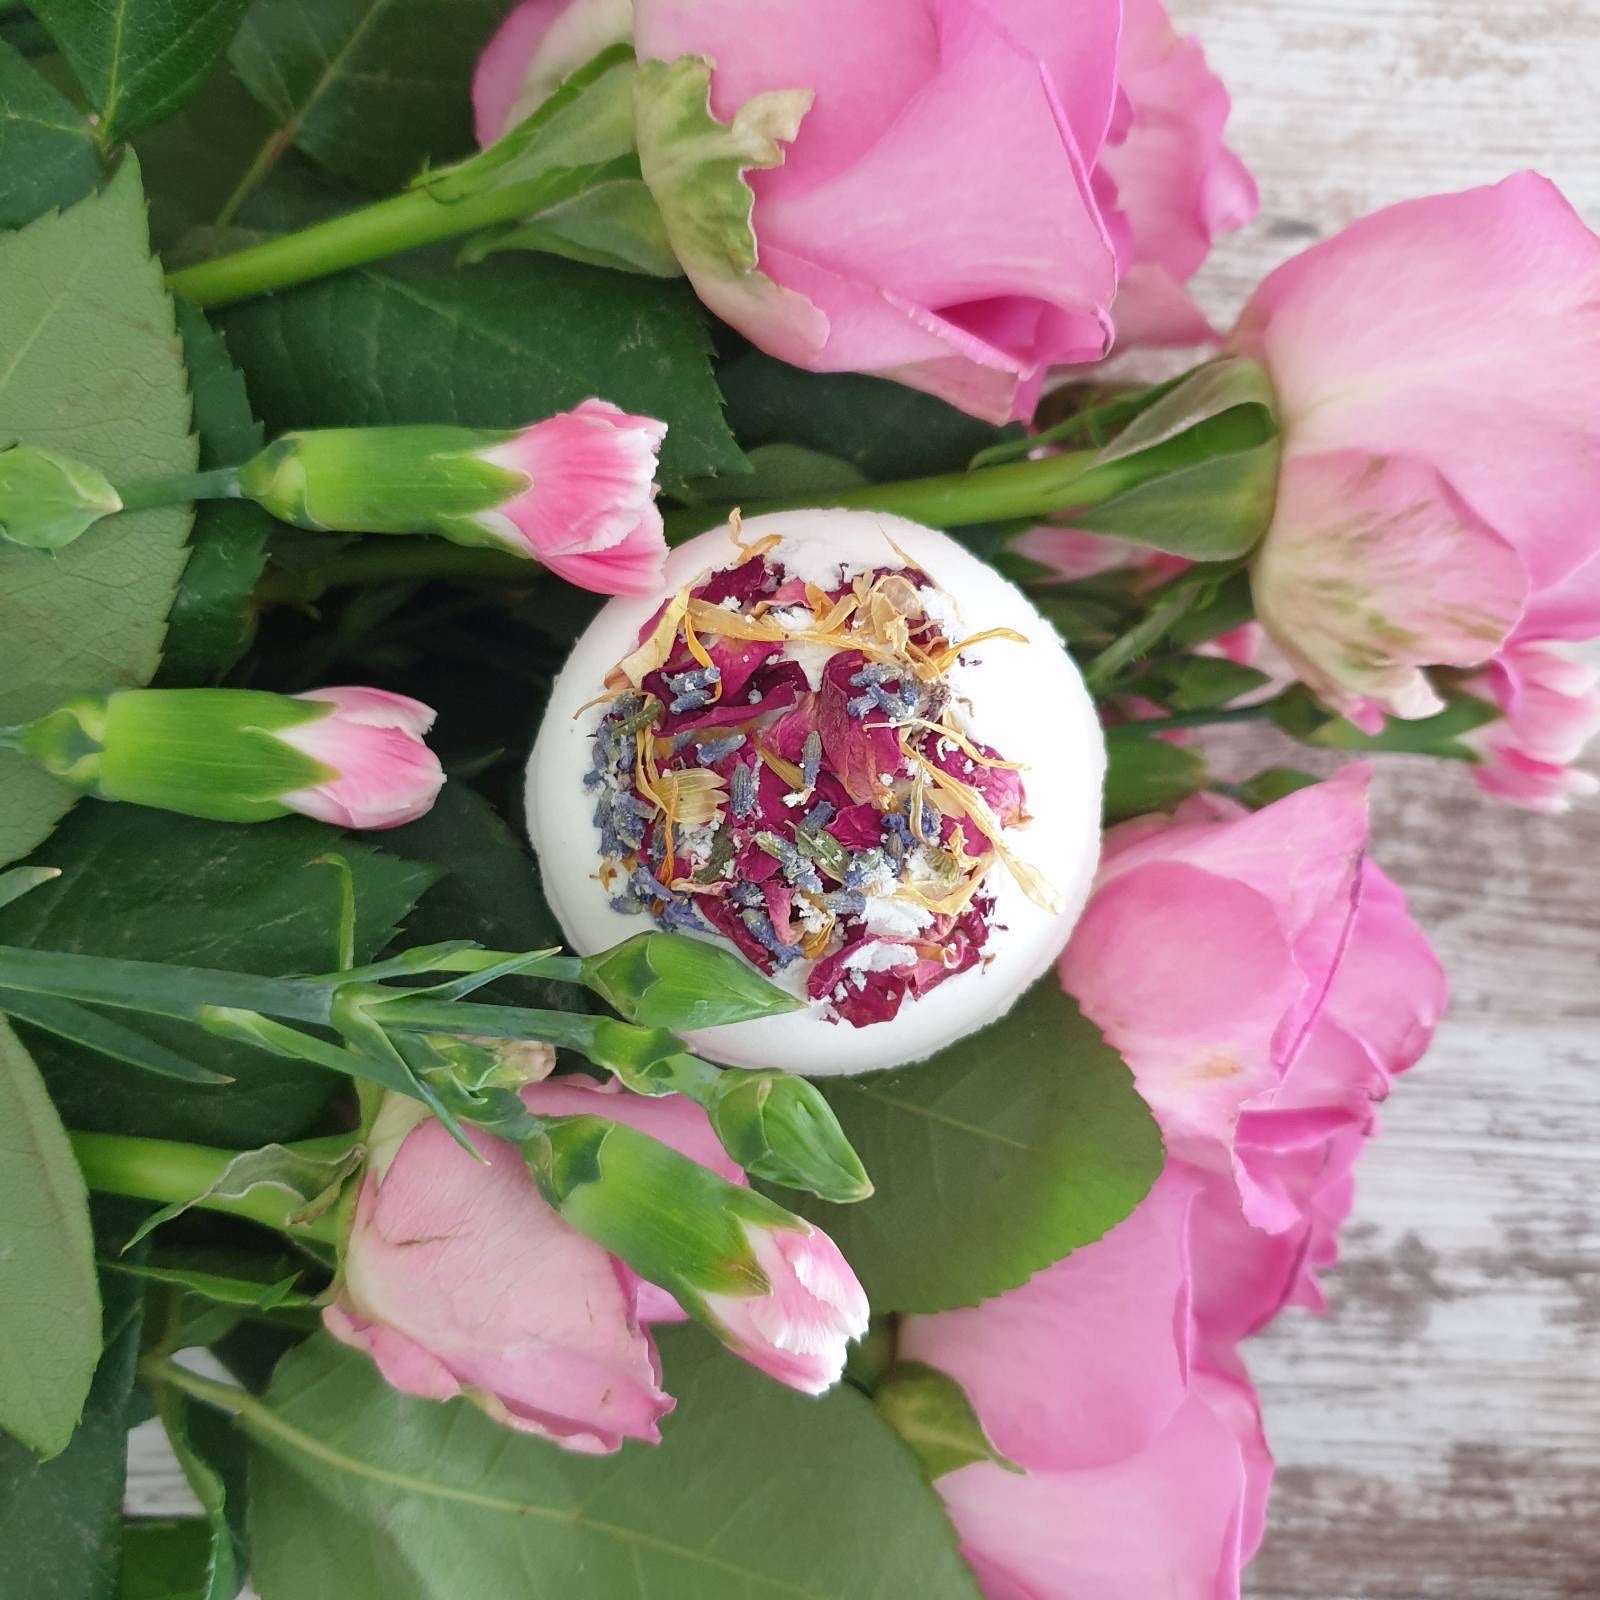 Floral Secret Bath Bomb has a sweet smell thanks to geranium and lavender, photographed with pink flowers.